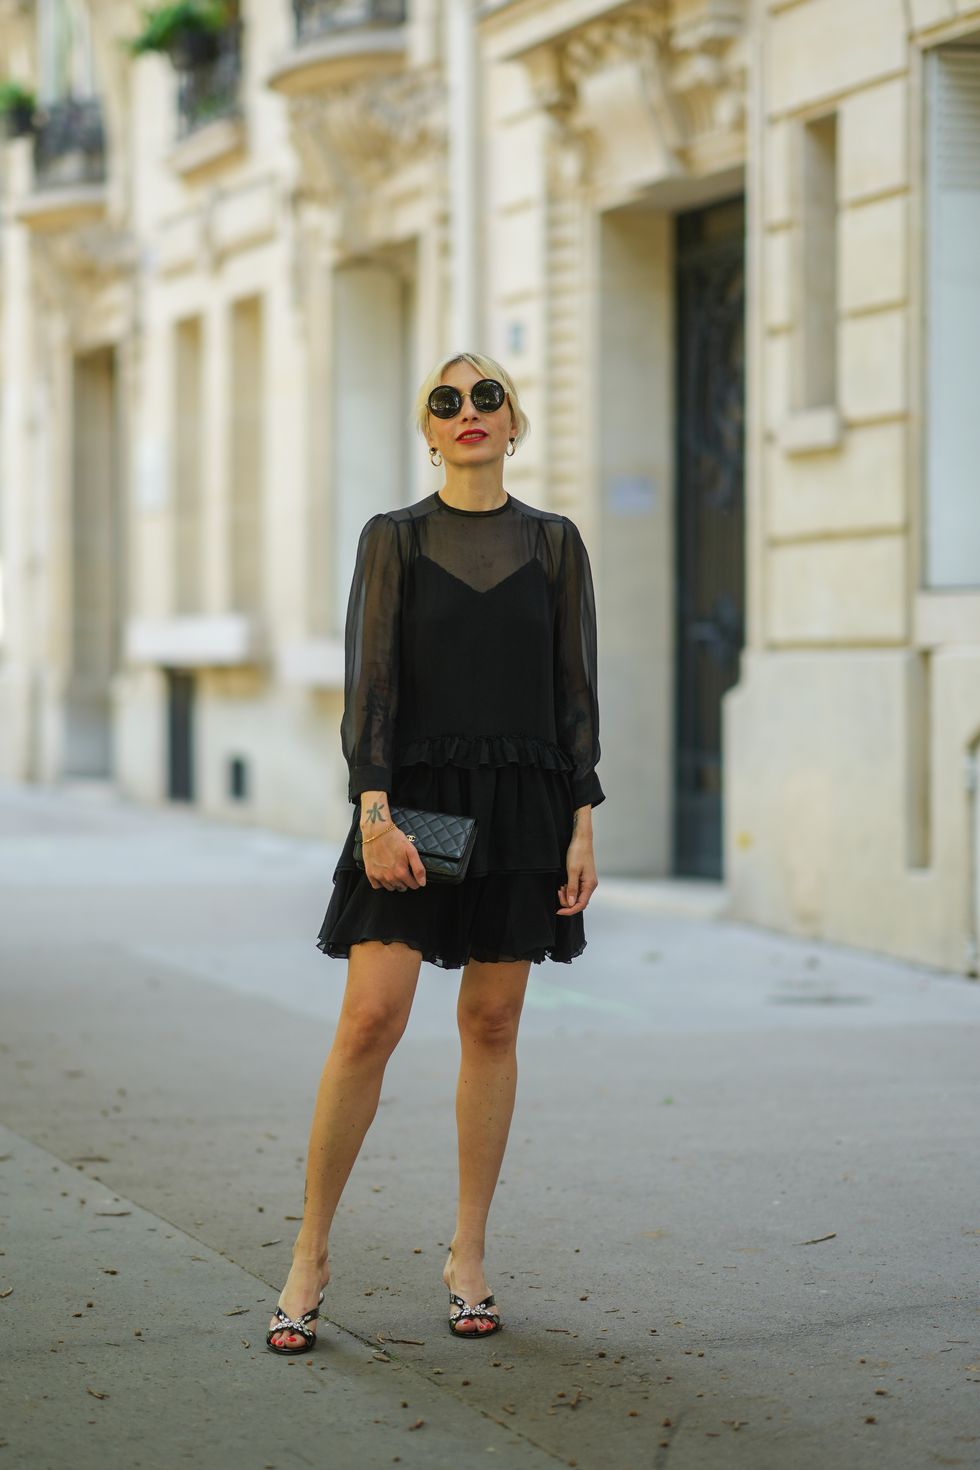 paris, france   june 10 emy venturini wears black sunglasses from linda farrow  the row, gold earrings, a saint laurent ysl necklace, a black silk tank top, a black transparent top dress with ruffle short skirt from miu miu, a gold ring, a gold chain bracelet, a black shiny grained leather chanel clutch bag, black shiny leather strappy pumps shoes with rhinestones on the straps from miu miu, on june 10, 2021 in paris, france photo by edward berthelotgetty images